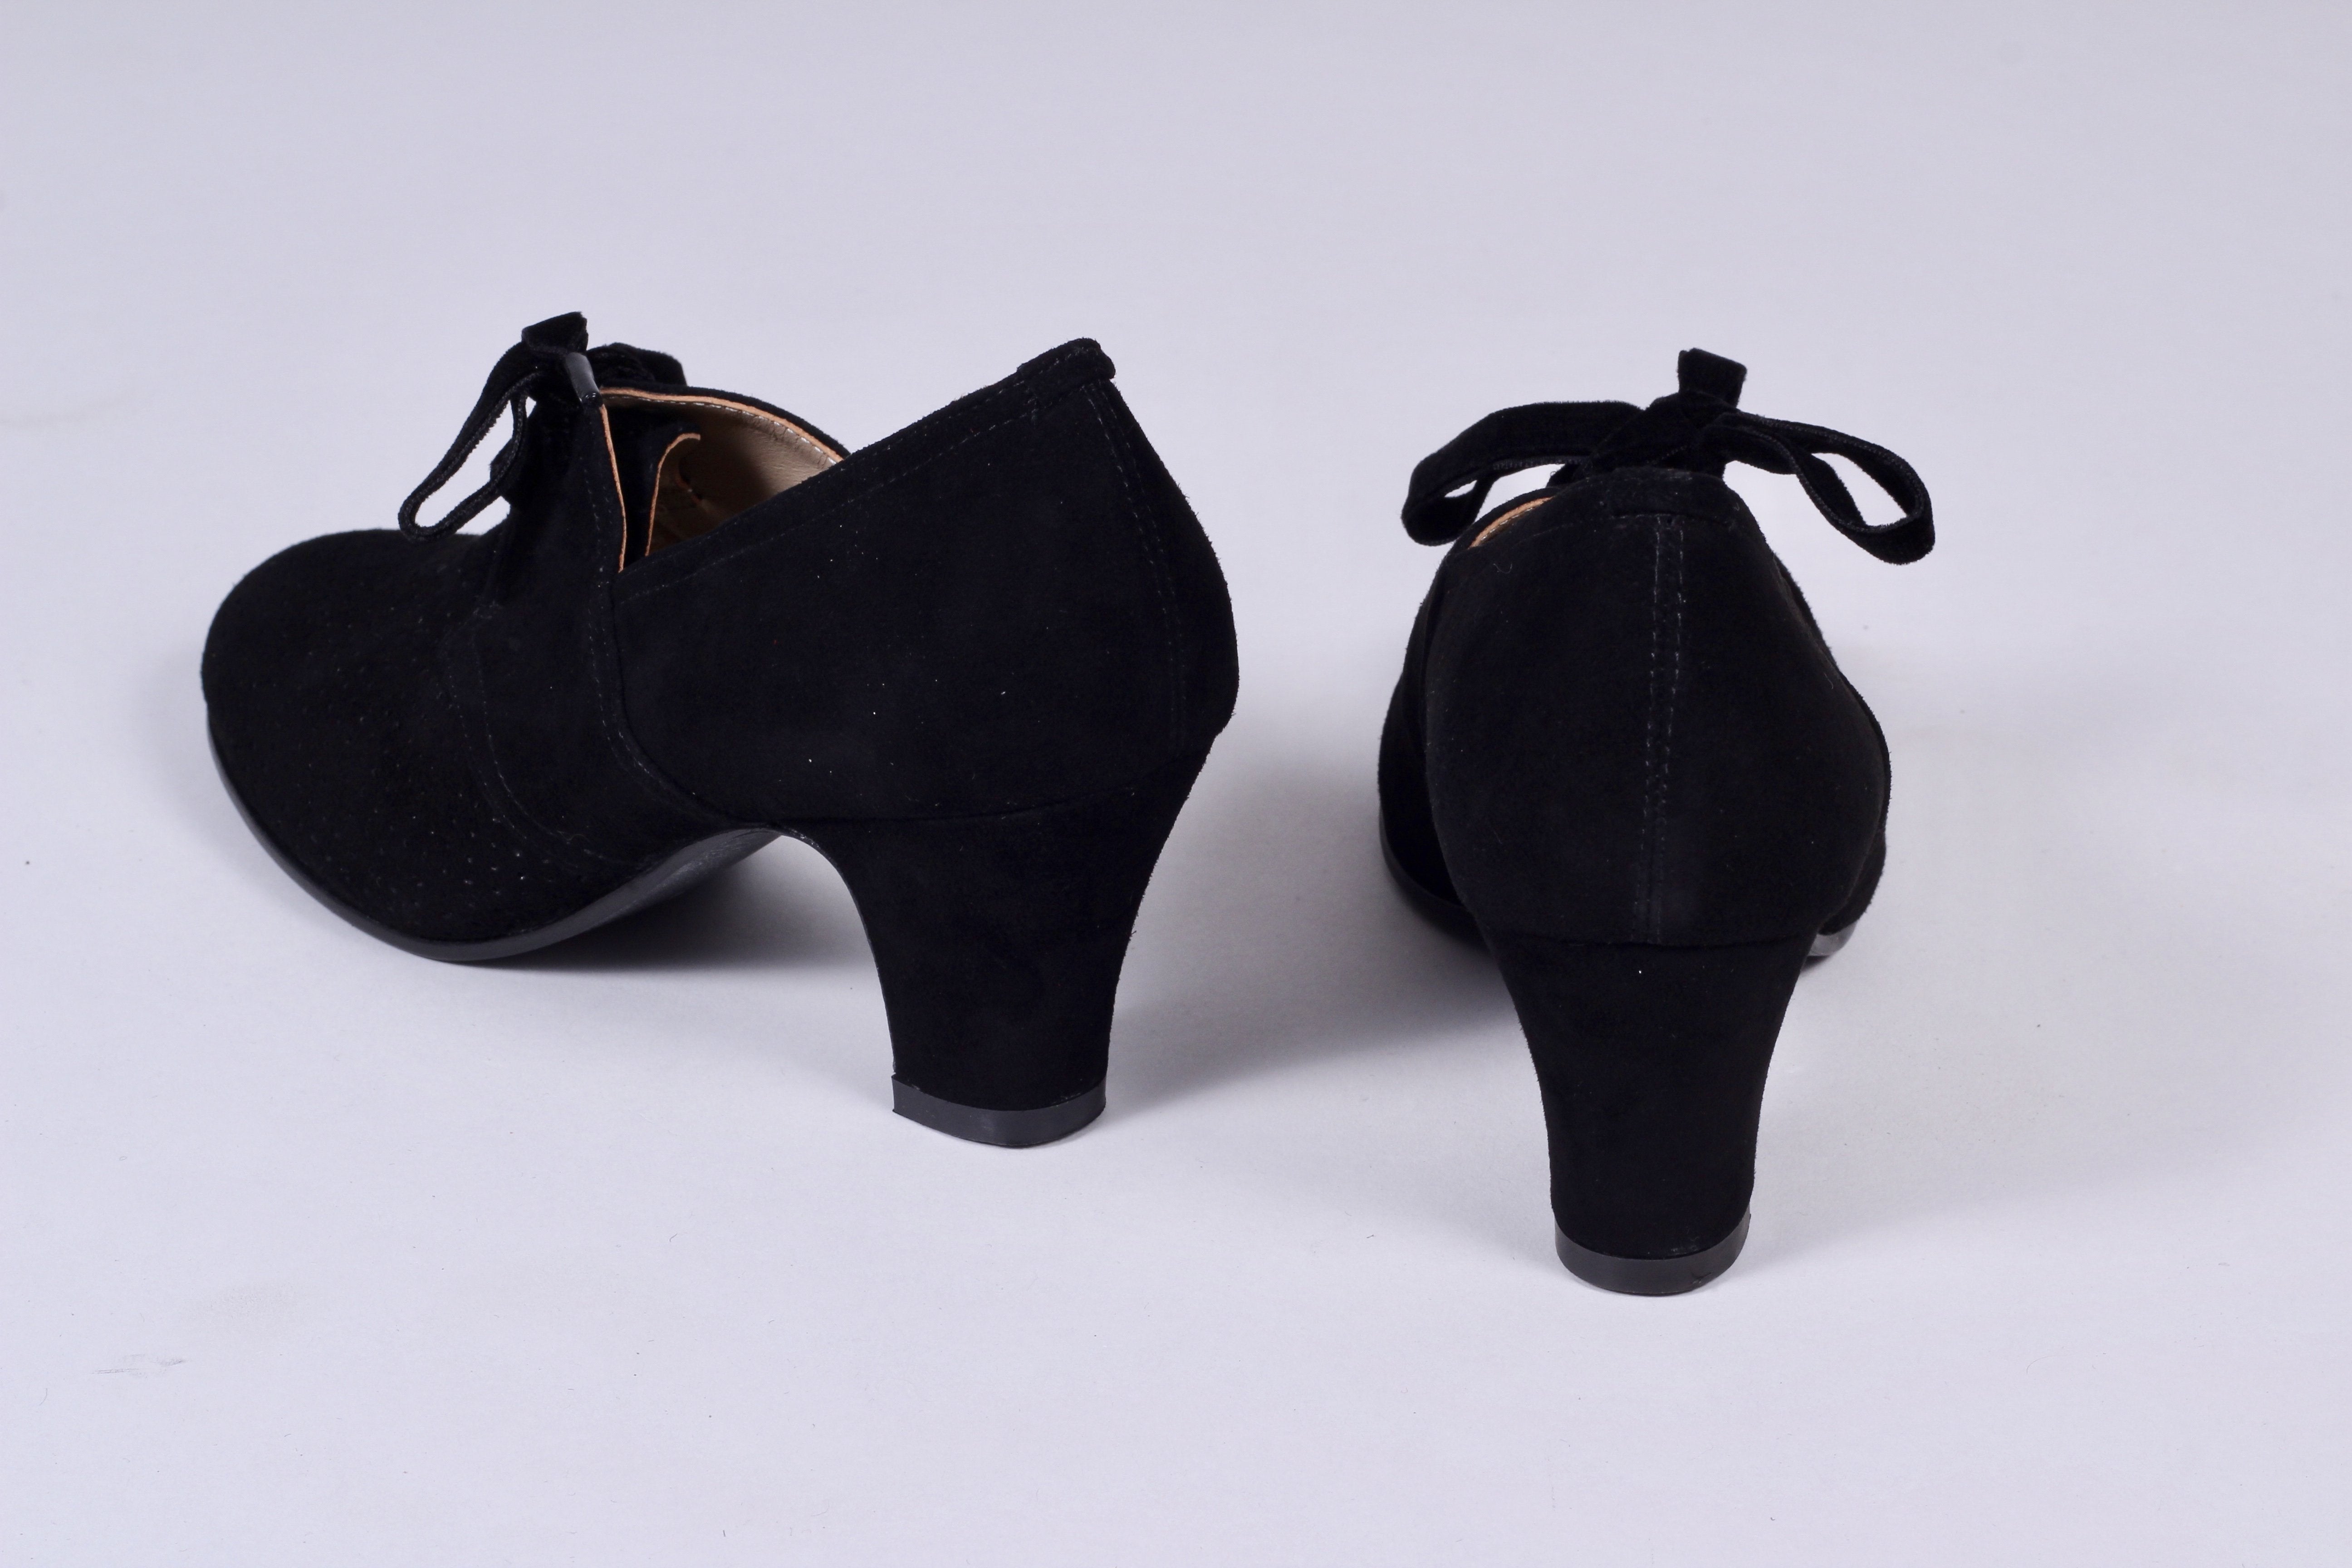 40s vintage style pumps in suede with lace - Black - Esther